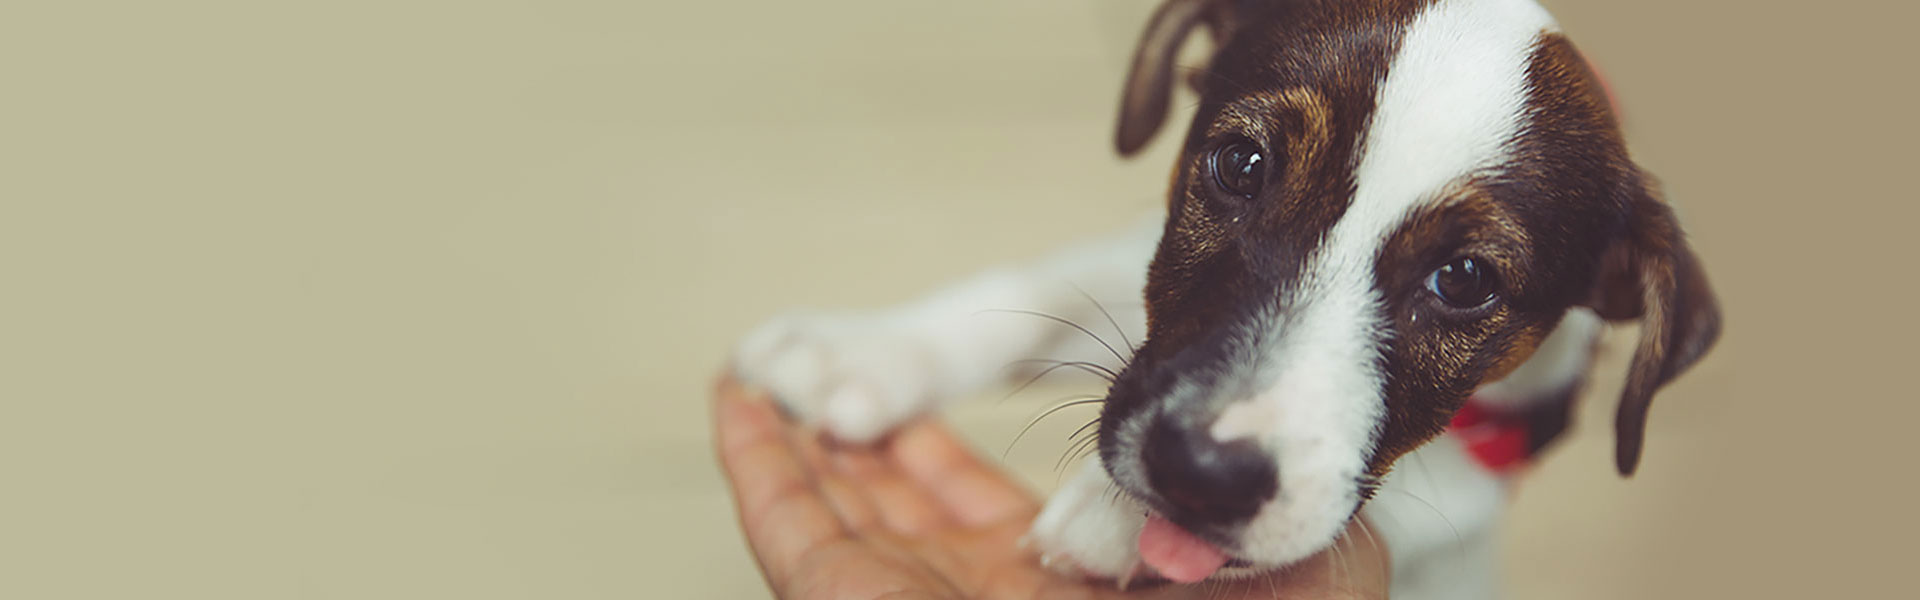 Crowdfunding & Charity Solutions for Your Pets' Health 